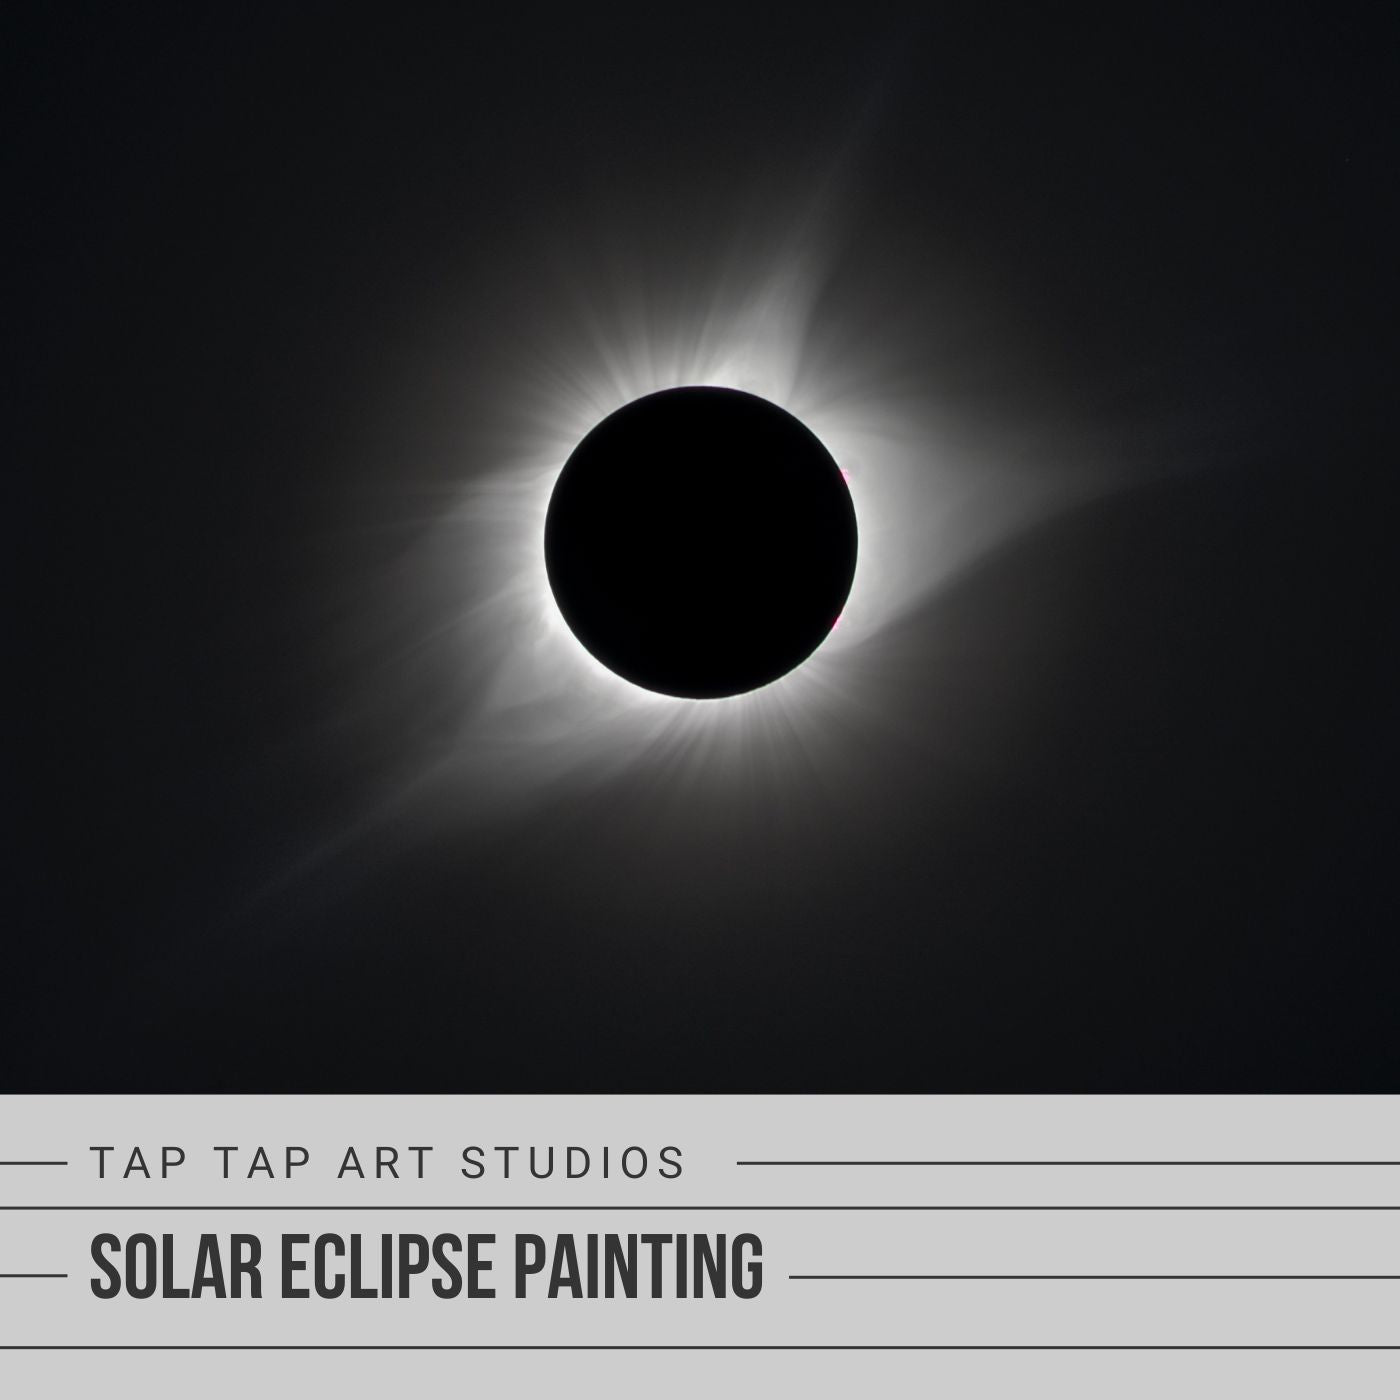 04/06 Eclipse Canvas Painting 6:00 PM